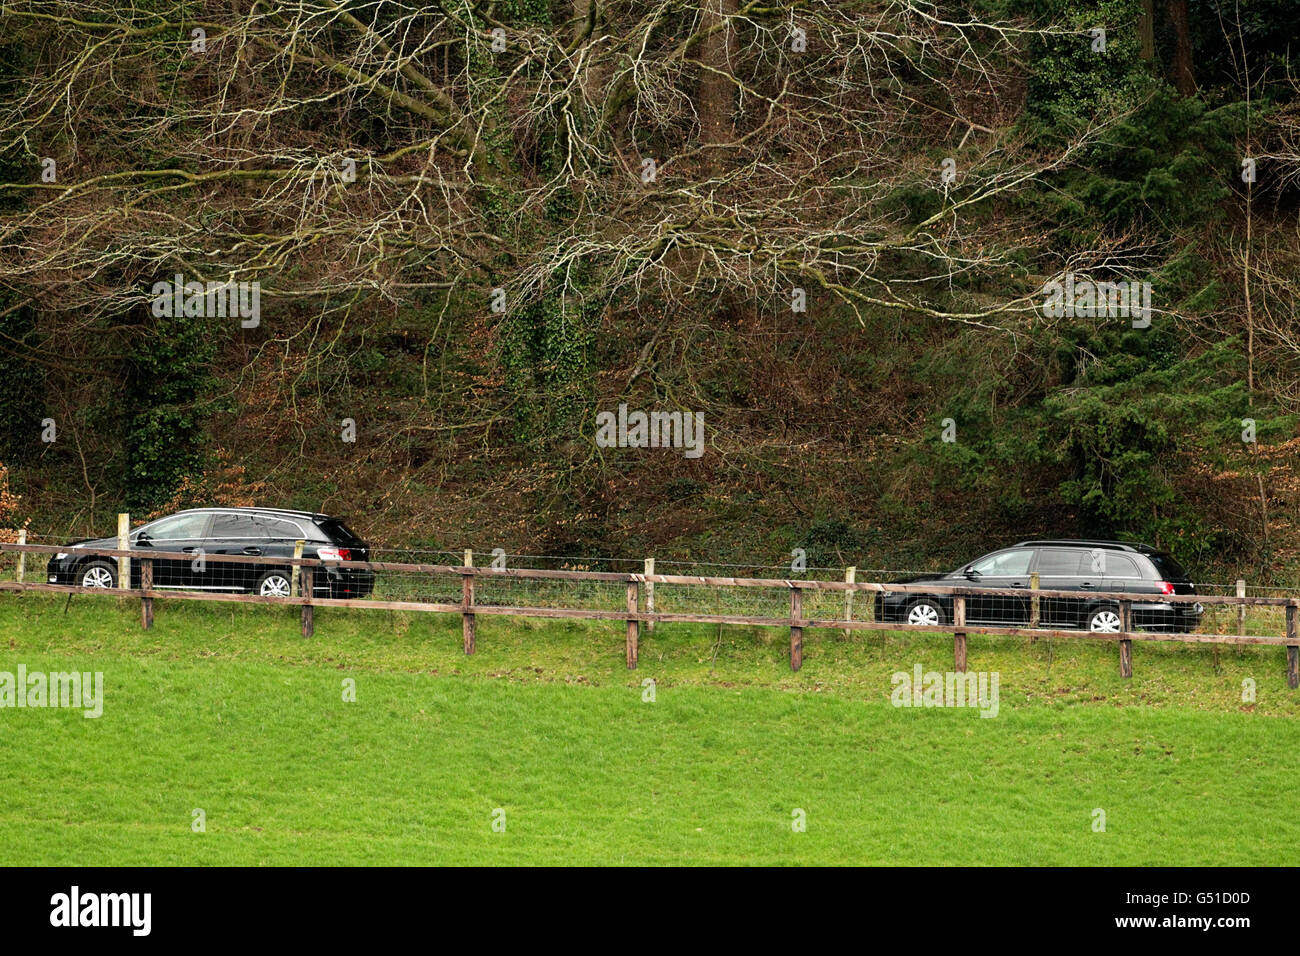 Bodies found in Ravensdale Park. Two Hearses leave the scene where two bodies were found in a burned out car at Ravensdale Park near Dundalk. Stock Photo